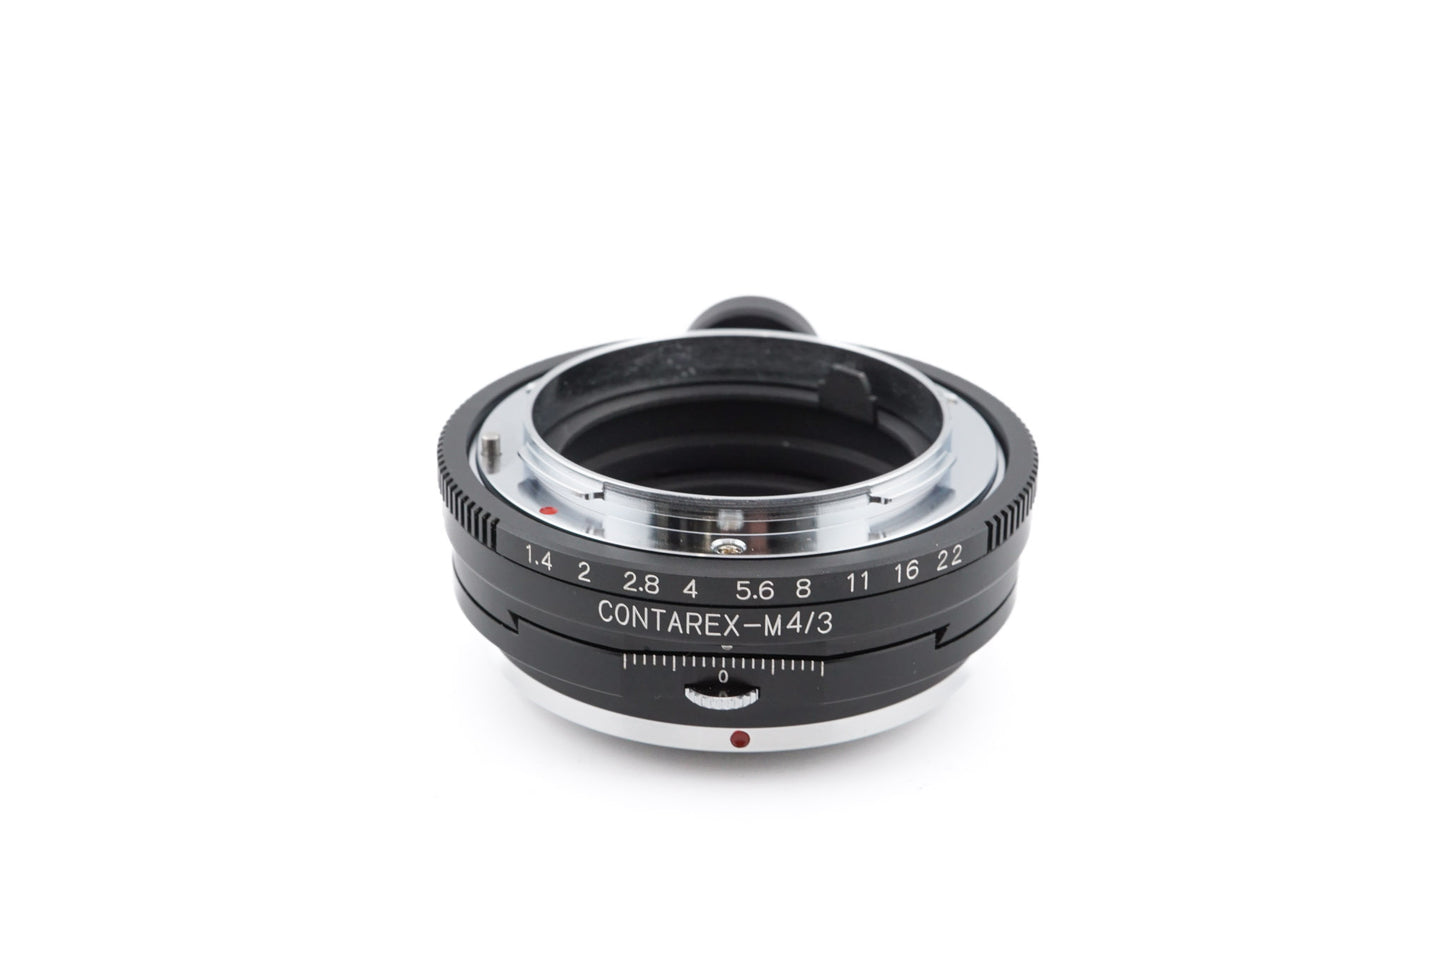 Generic Contarex - Micro Four Thirds Shift Adapter - Lens Adapter